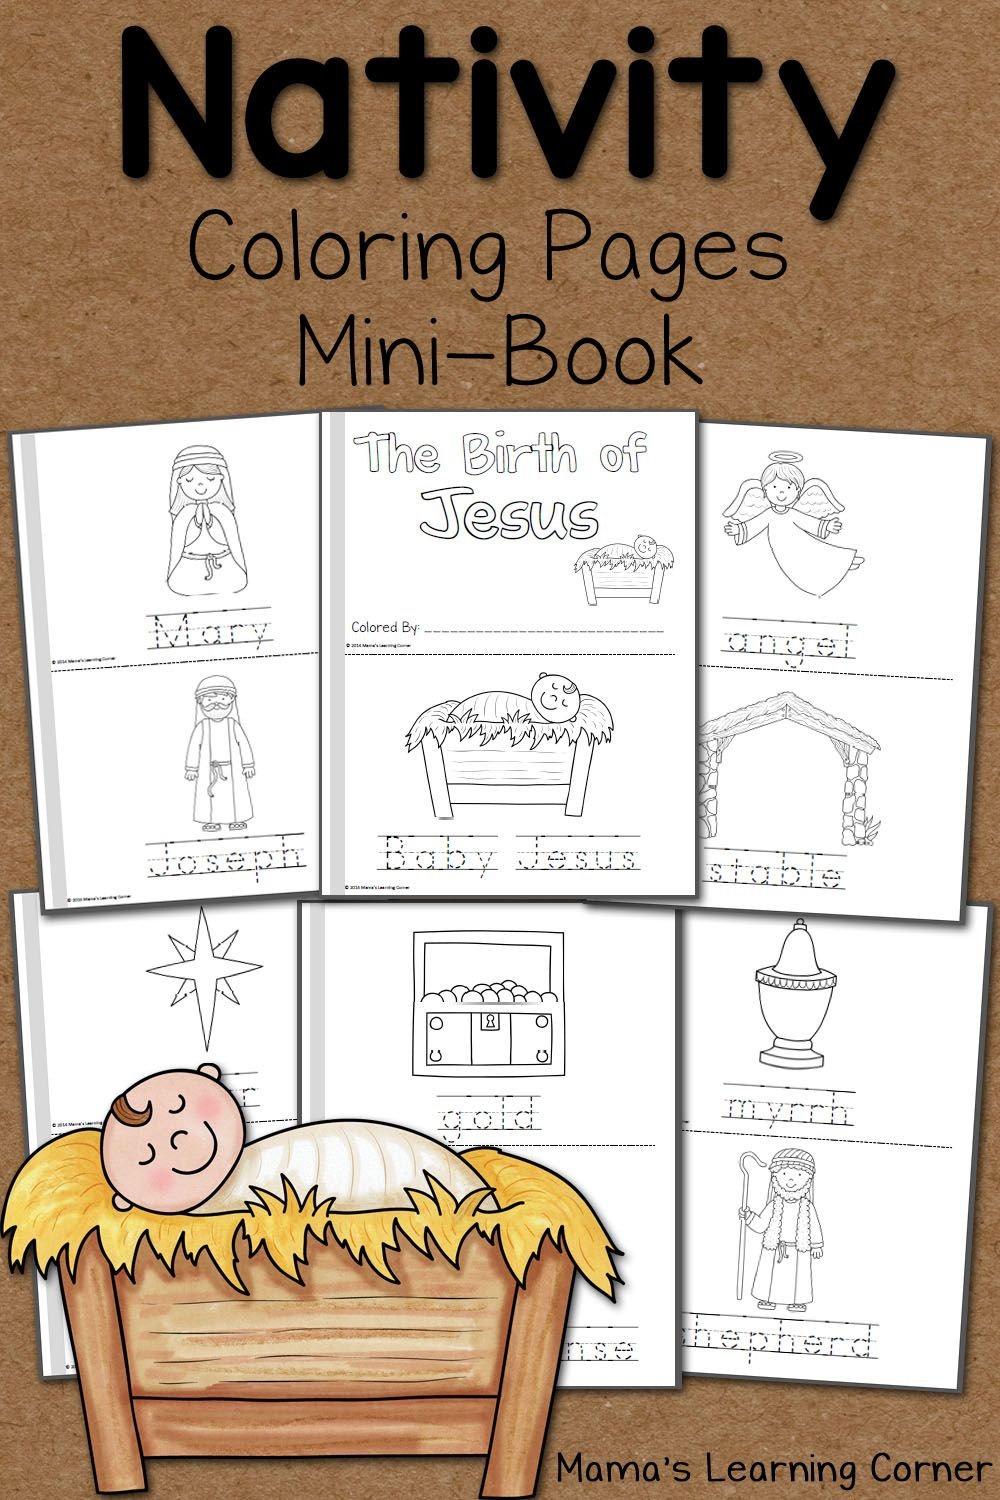 Nativity Coloring Pages | Ultimate Homeschool Board | Nativity - Free Printable Christmas Story Coloring Pages